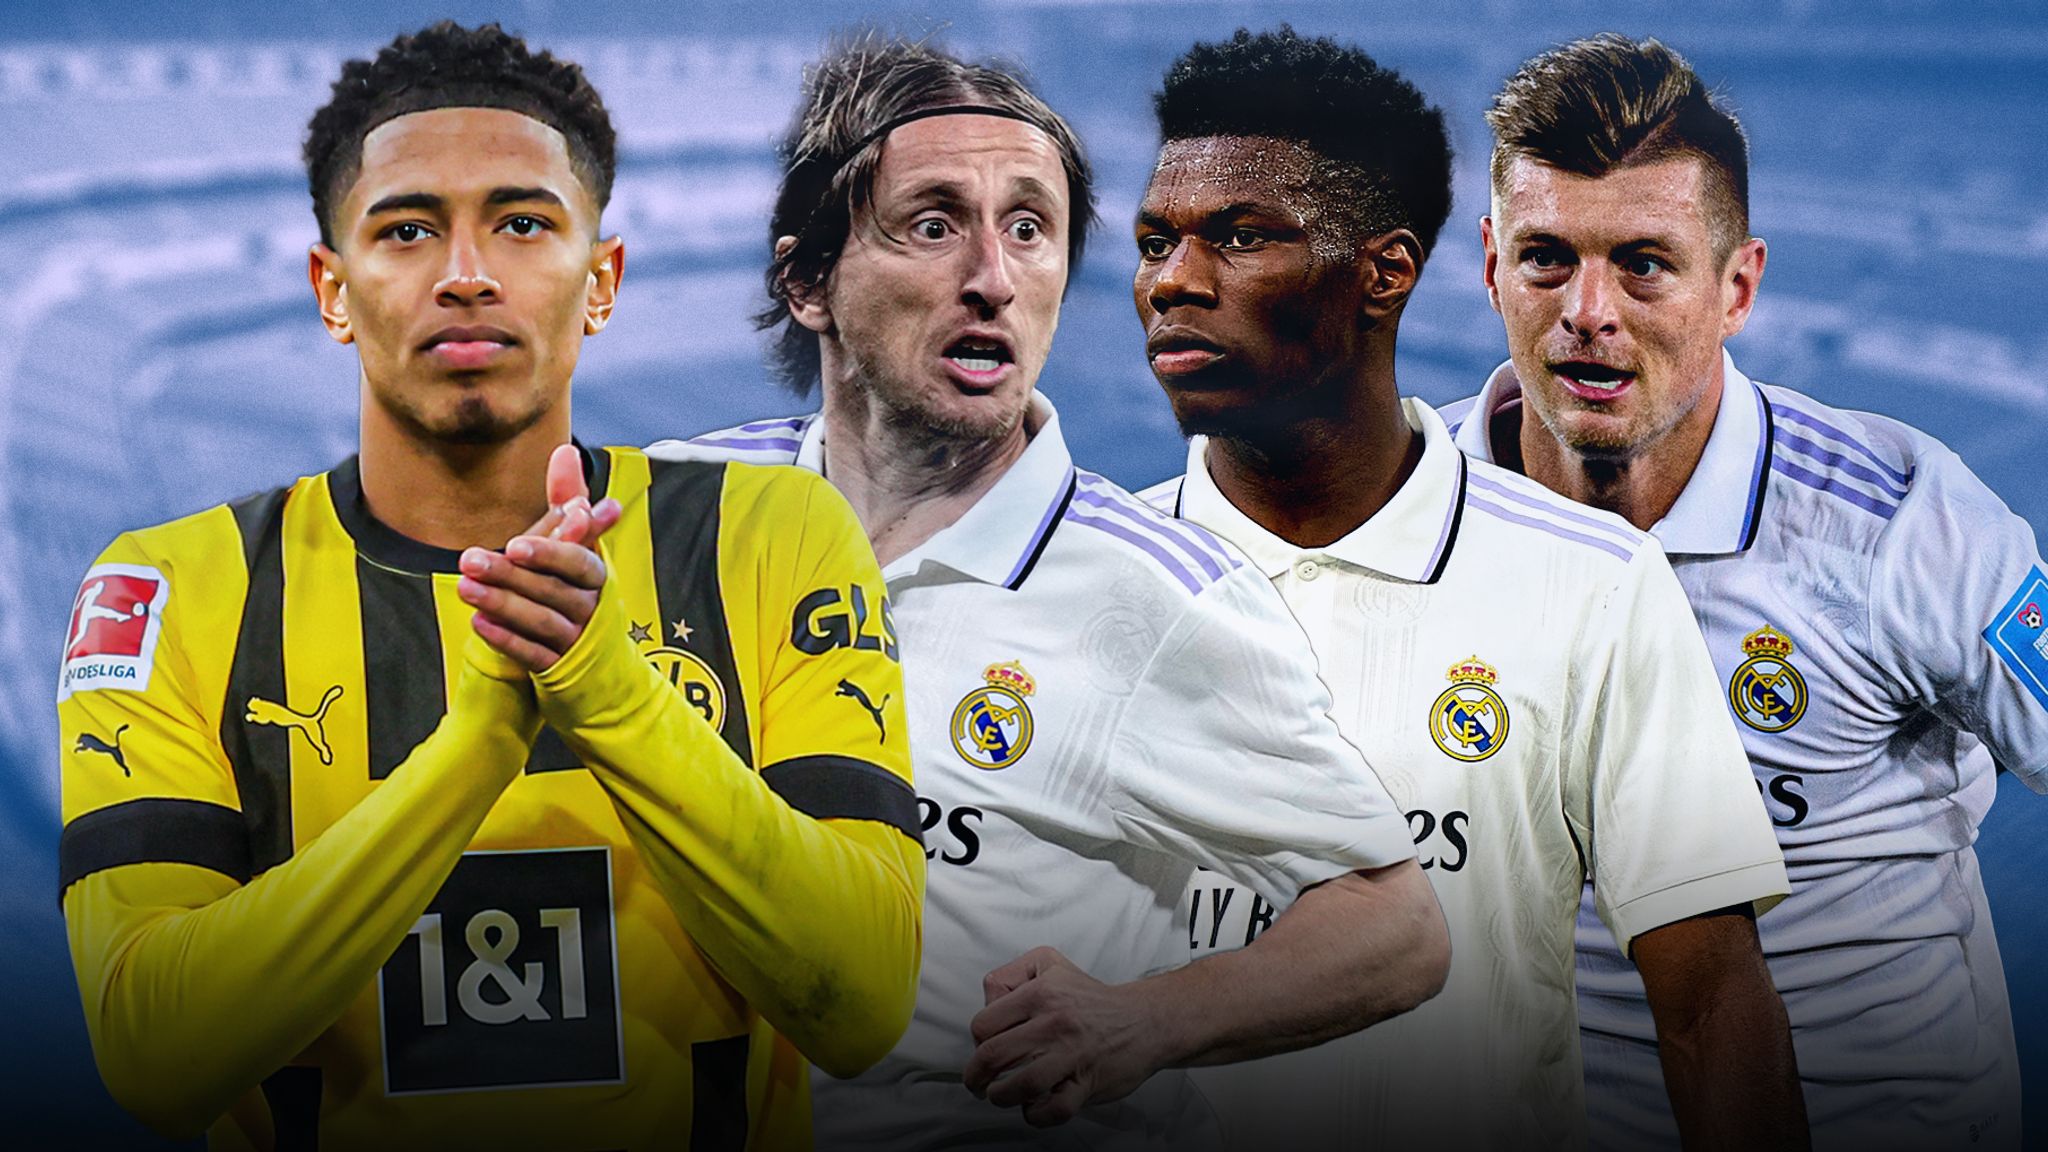 The 7 Real Madrid players currently set to leave on a free this summer